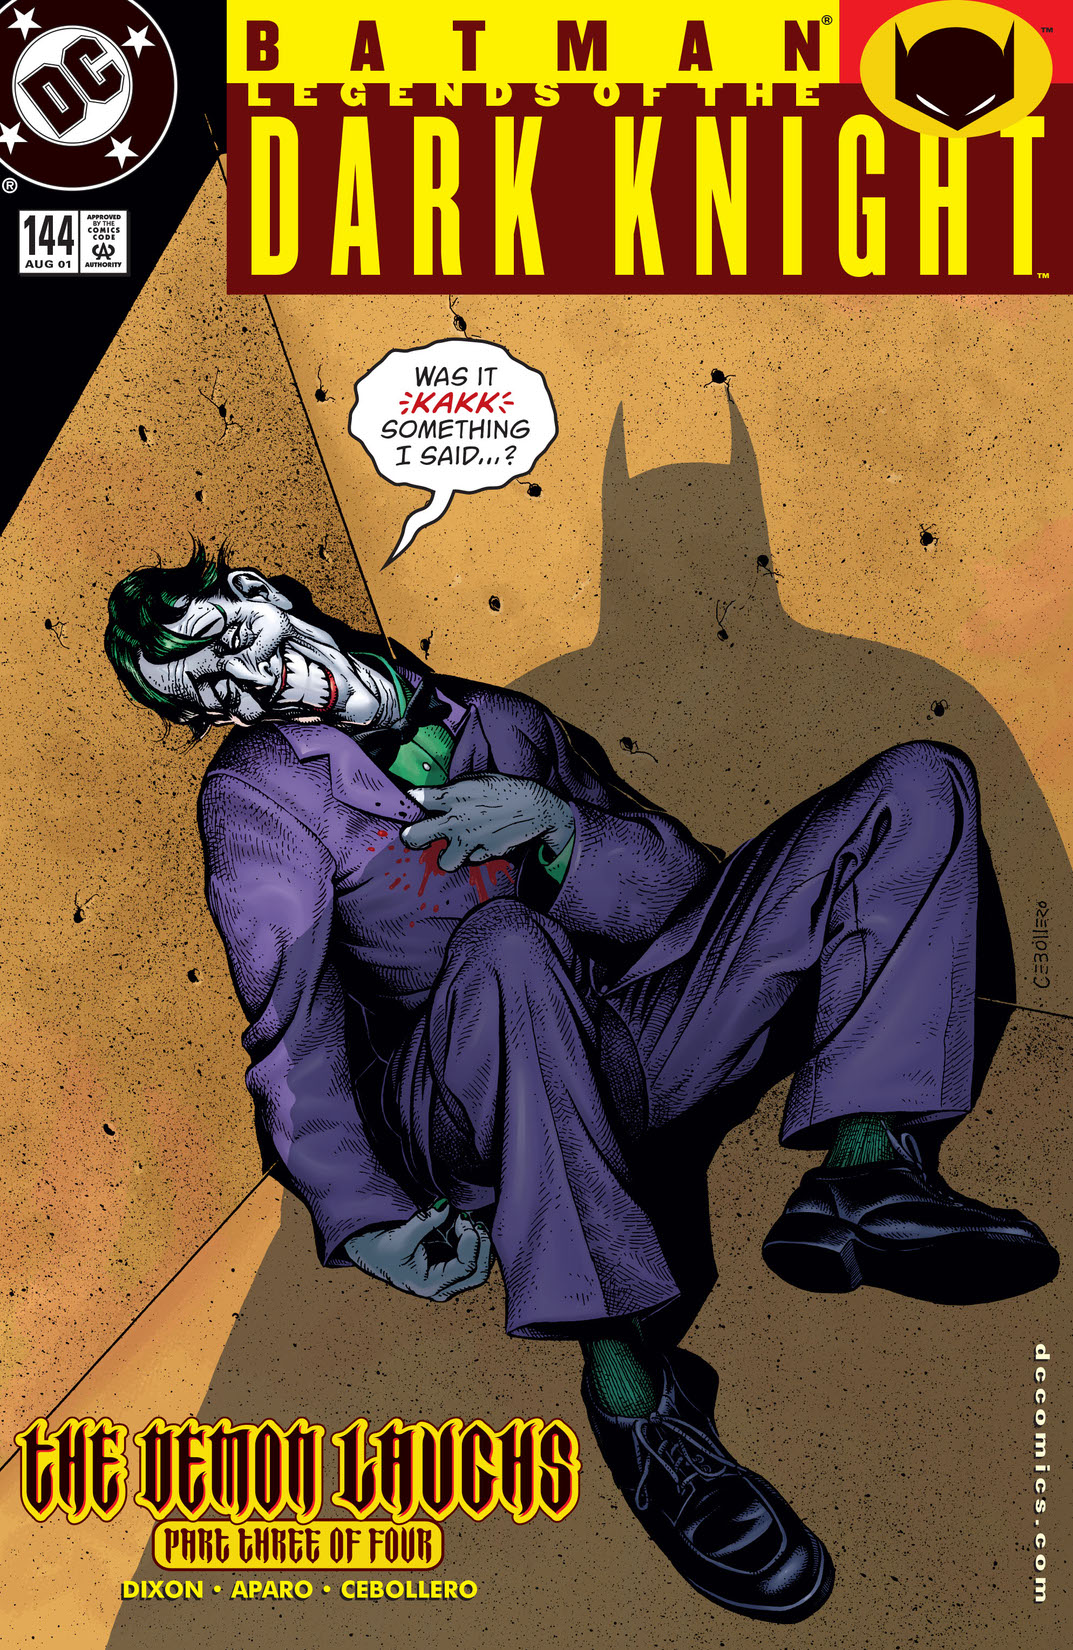 Batman: Legends of the Dark Knight #144 preview images